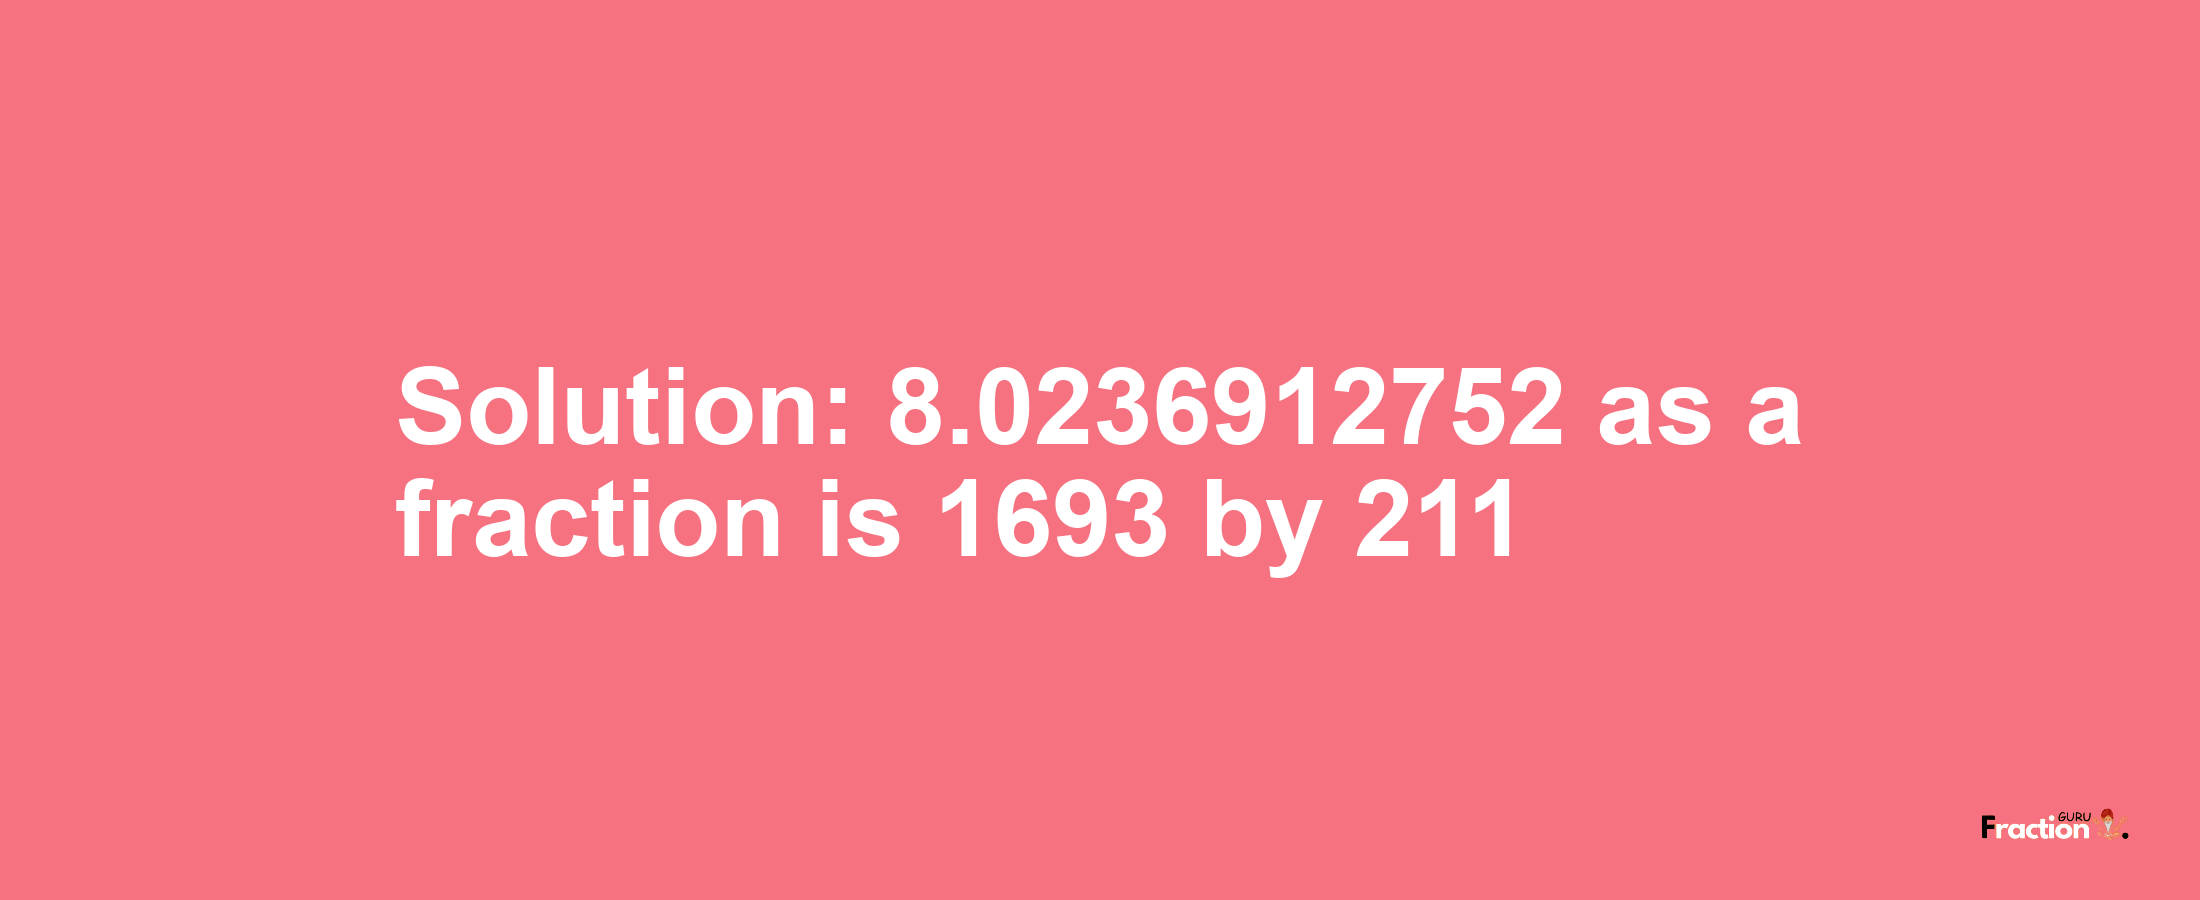 Solution:8.0236912752 as a fraction is 1693/211